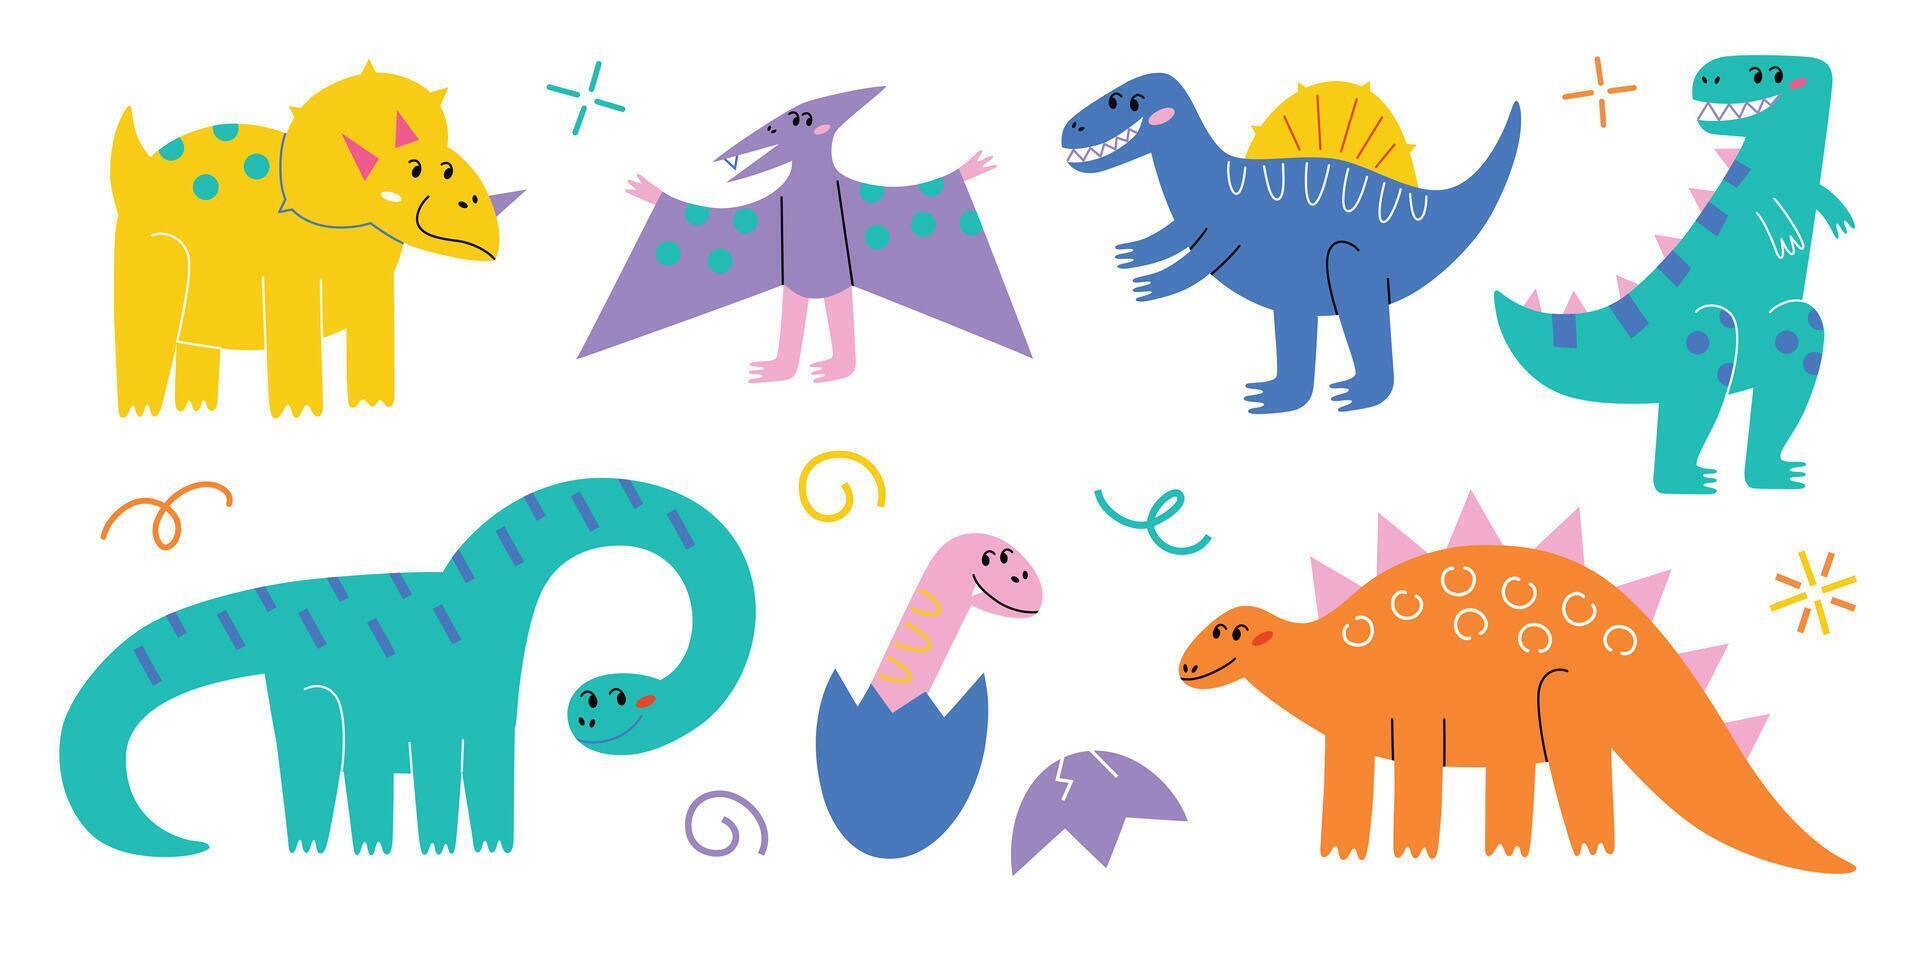 Cute dinosaurs collection, colorful cartoon monsters, illustrations of triceratops, tyrannosaurus, diplodocus, funny jurassic reptiles set, wild nature for kids, smiling dino vector